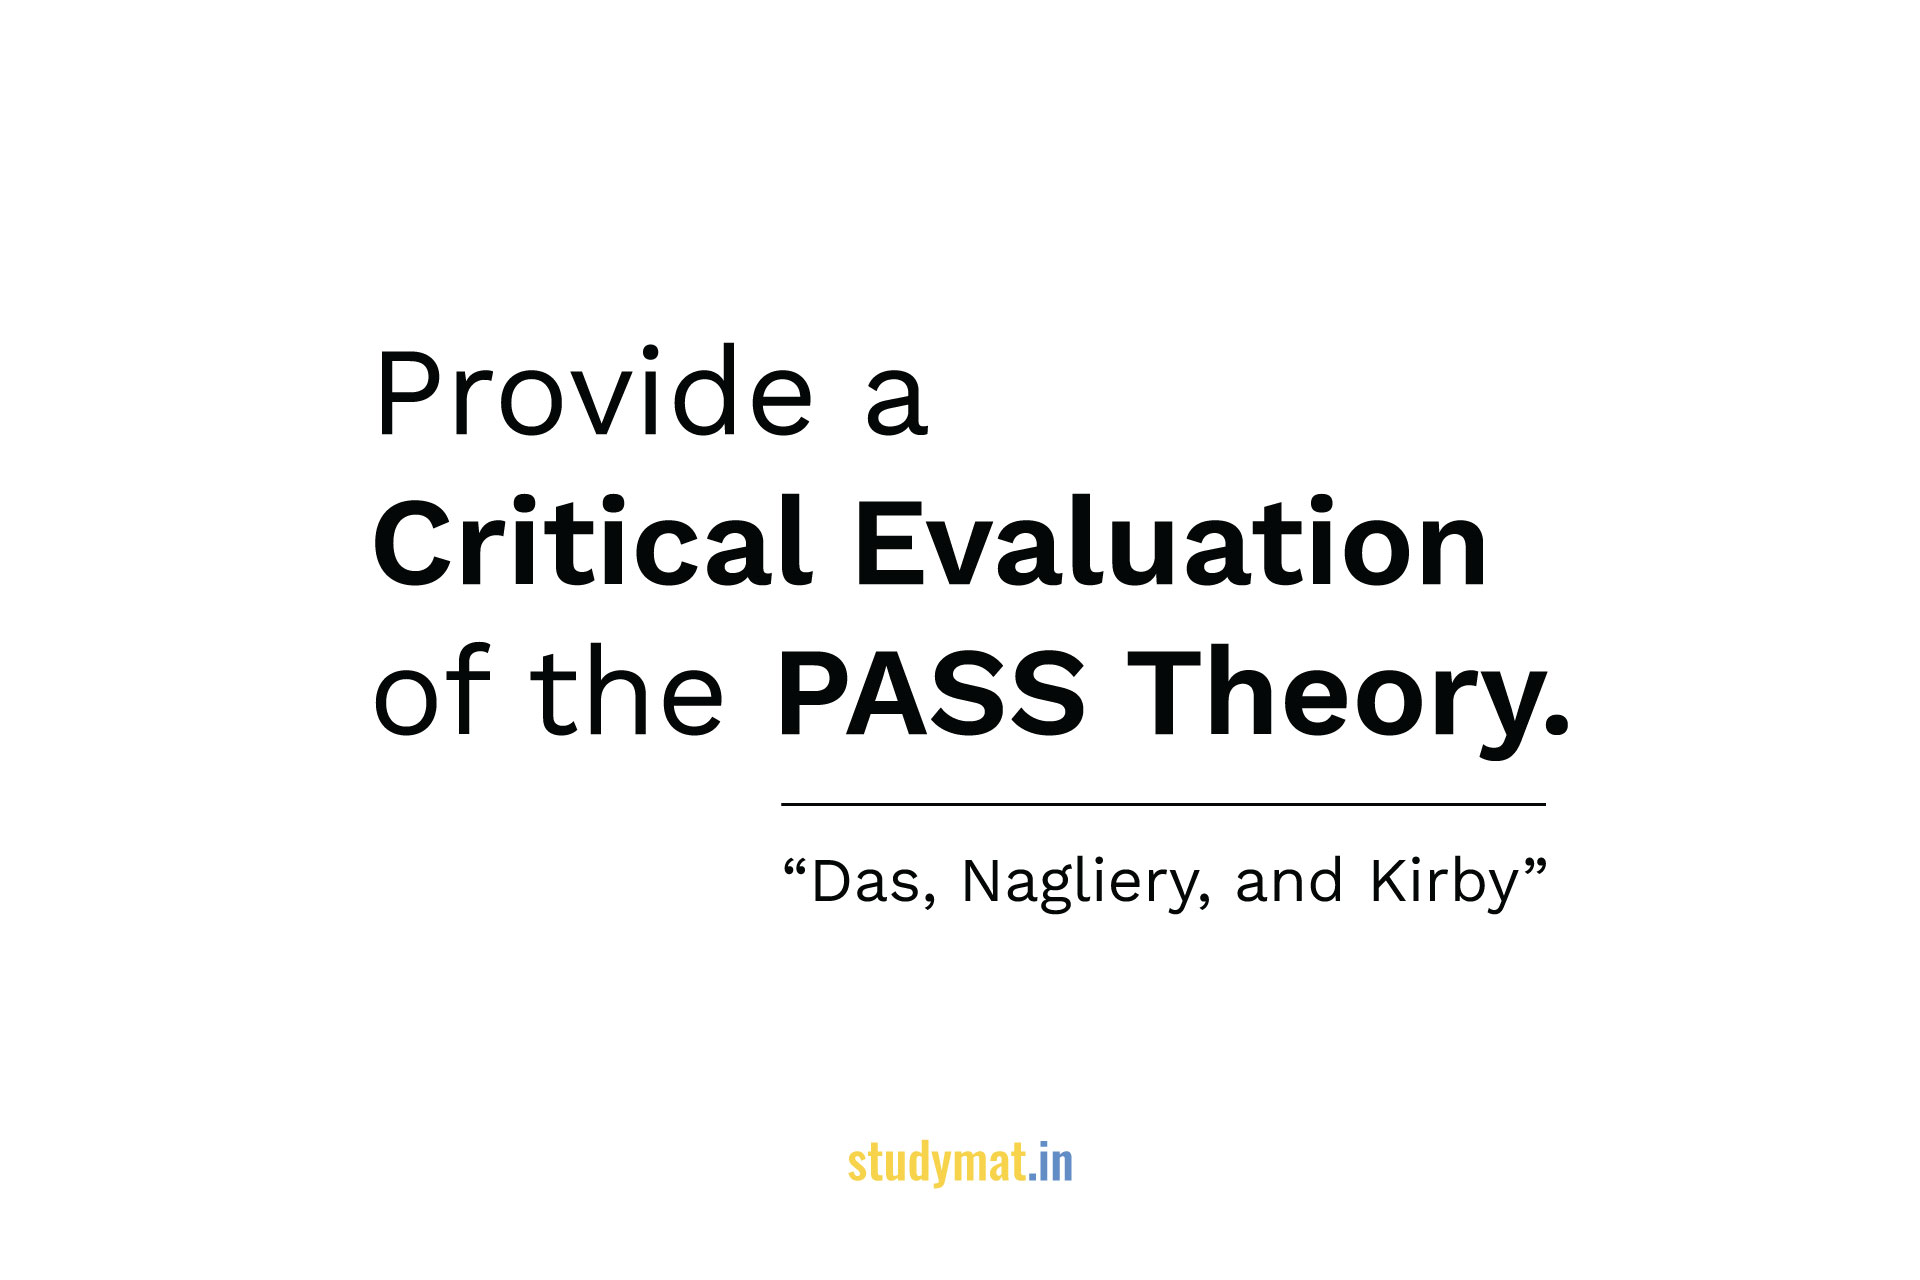 Critical Evaluation of PASS Theory